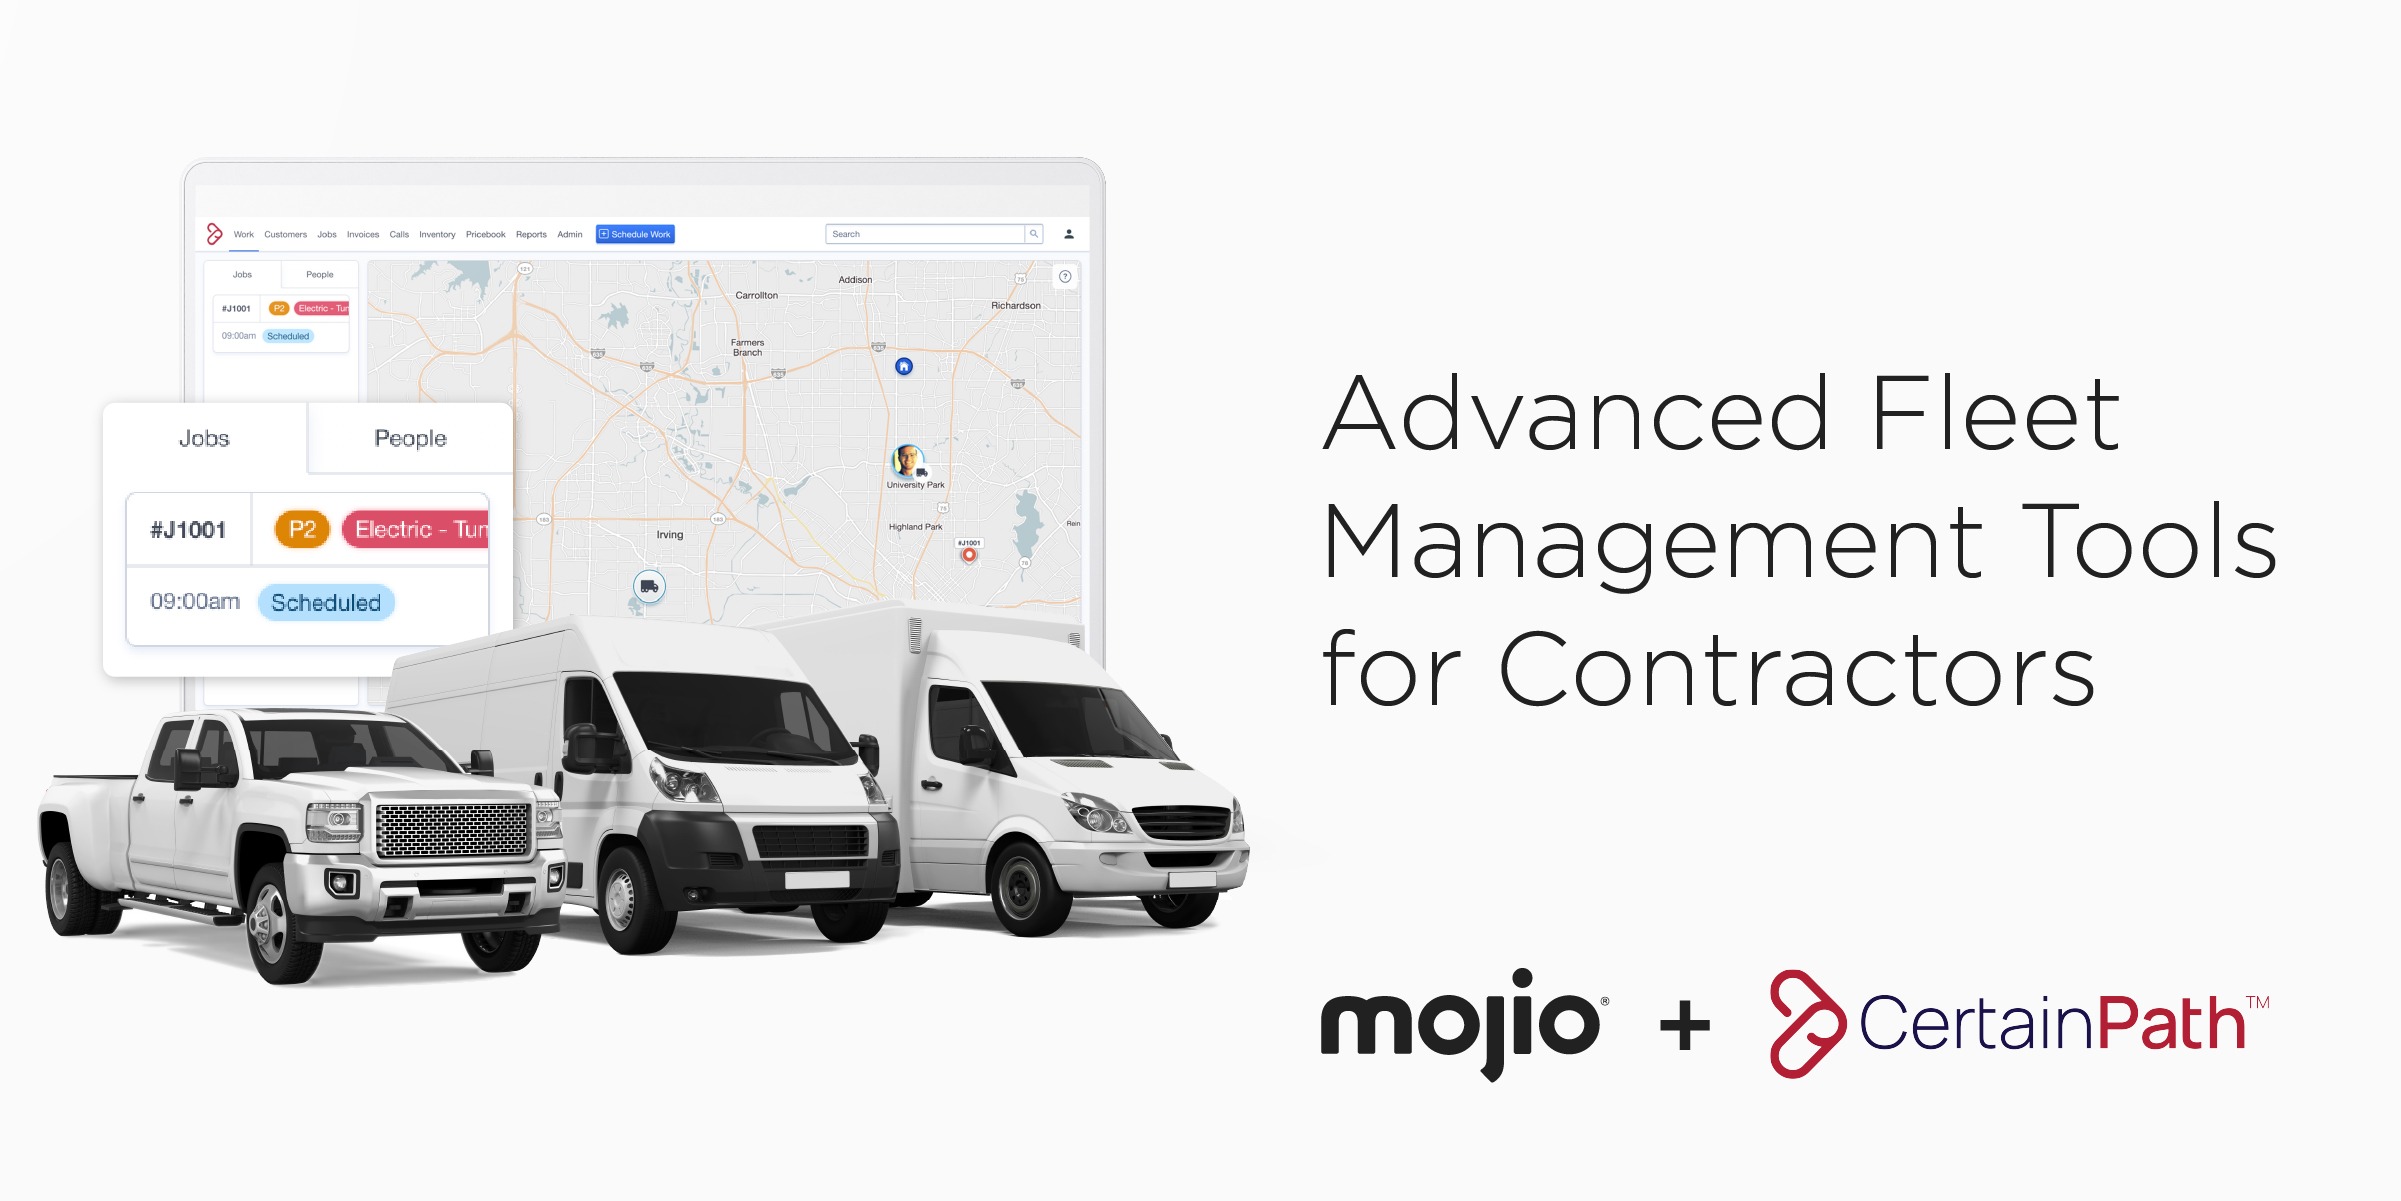 Mojio and CertainPath Join Forces to Empower Home Service Contractors with Advanced Fleet Management Tools